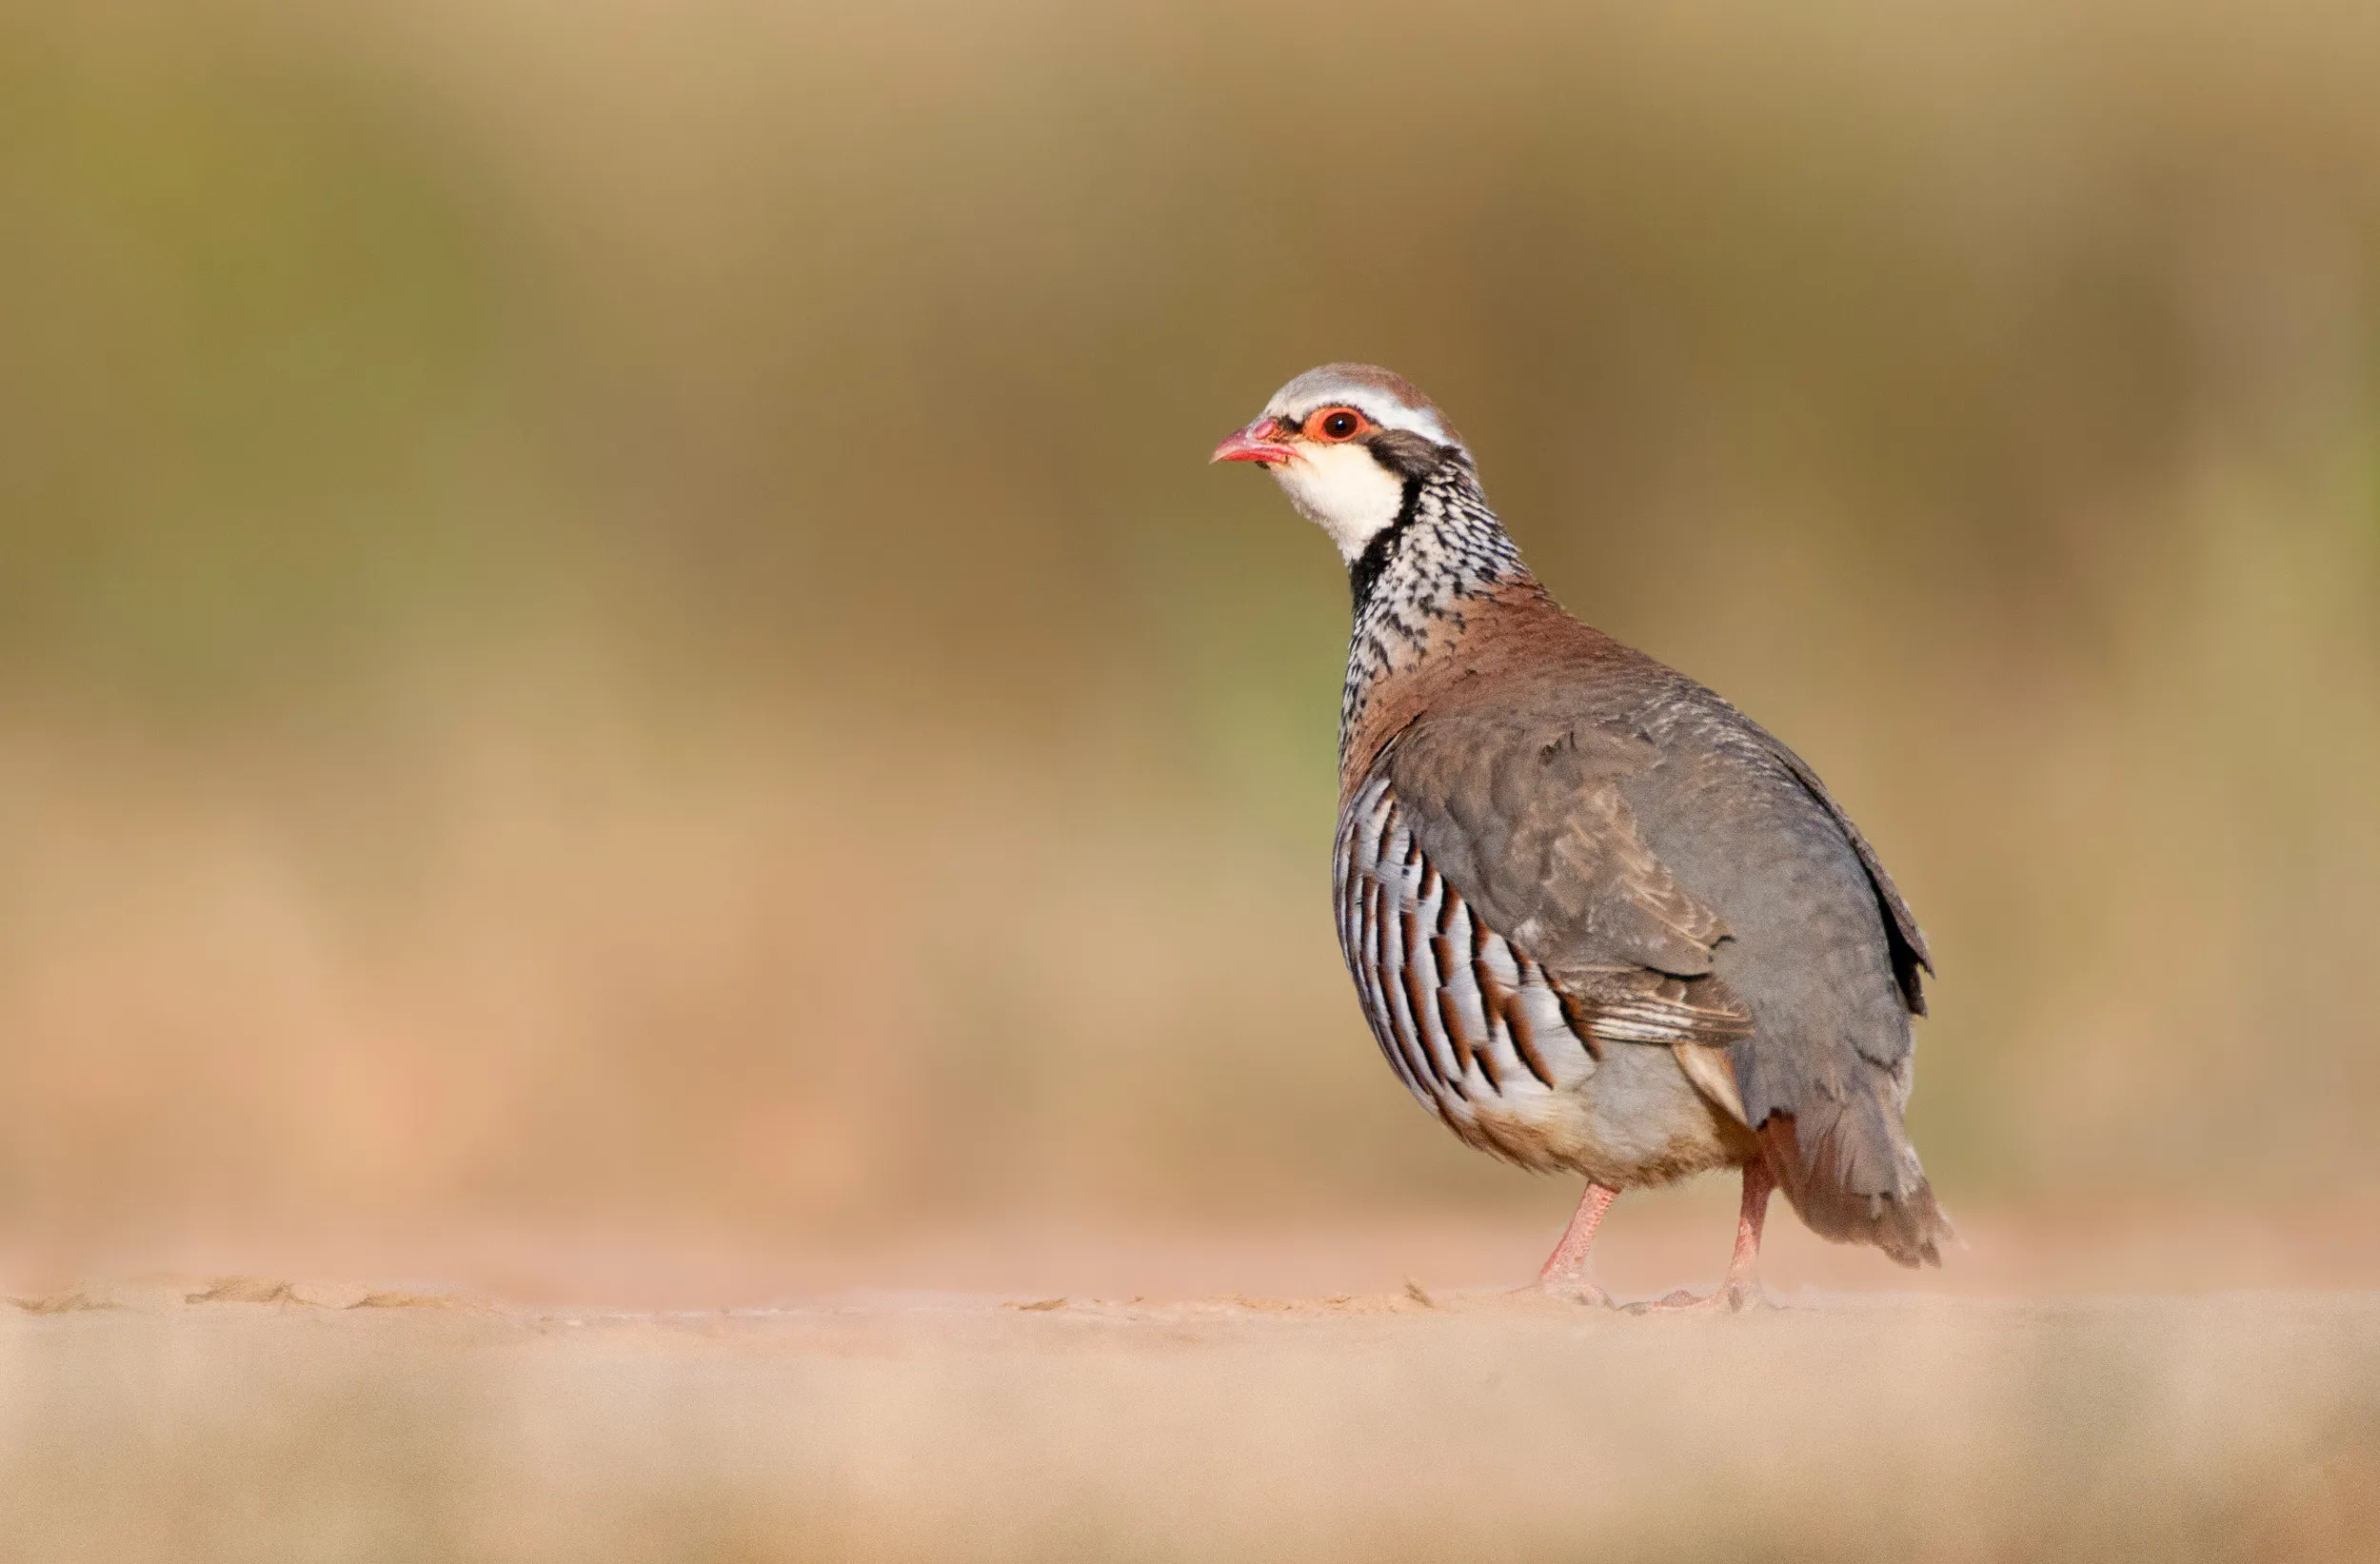 A lone Red-legged Partridge stood on a dusty floor.